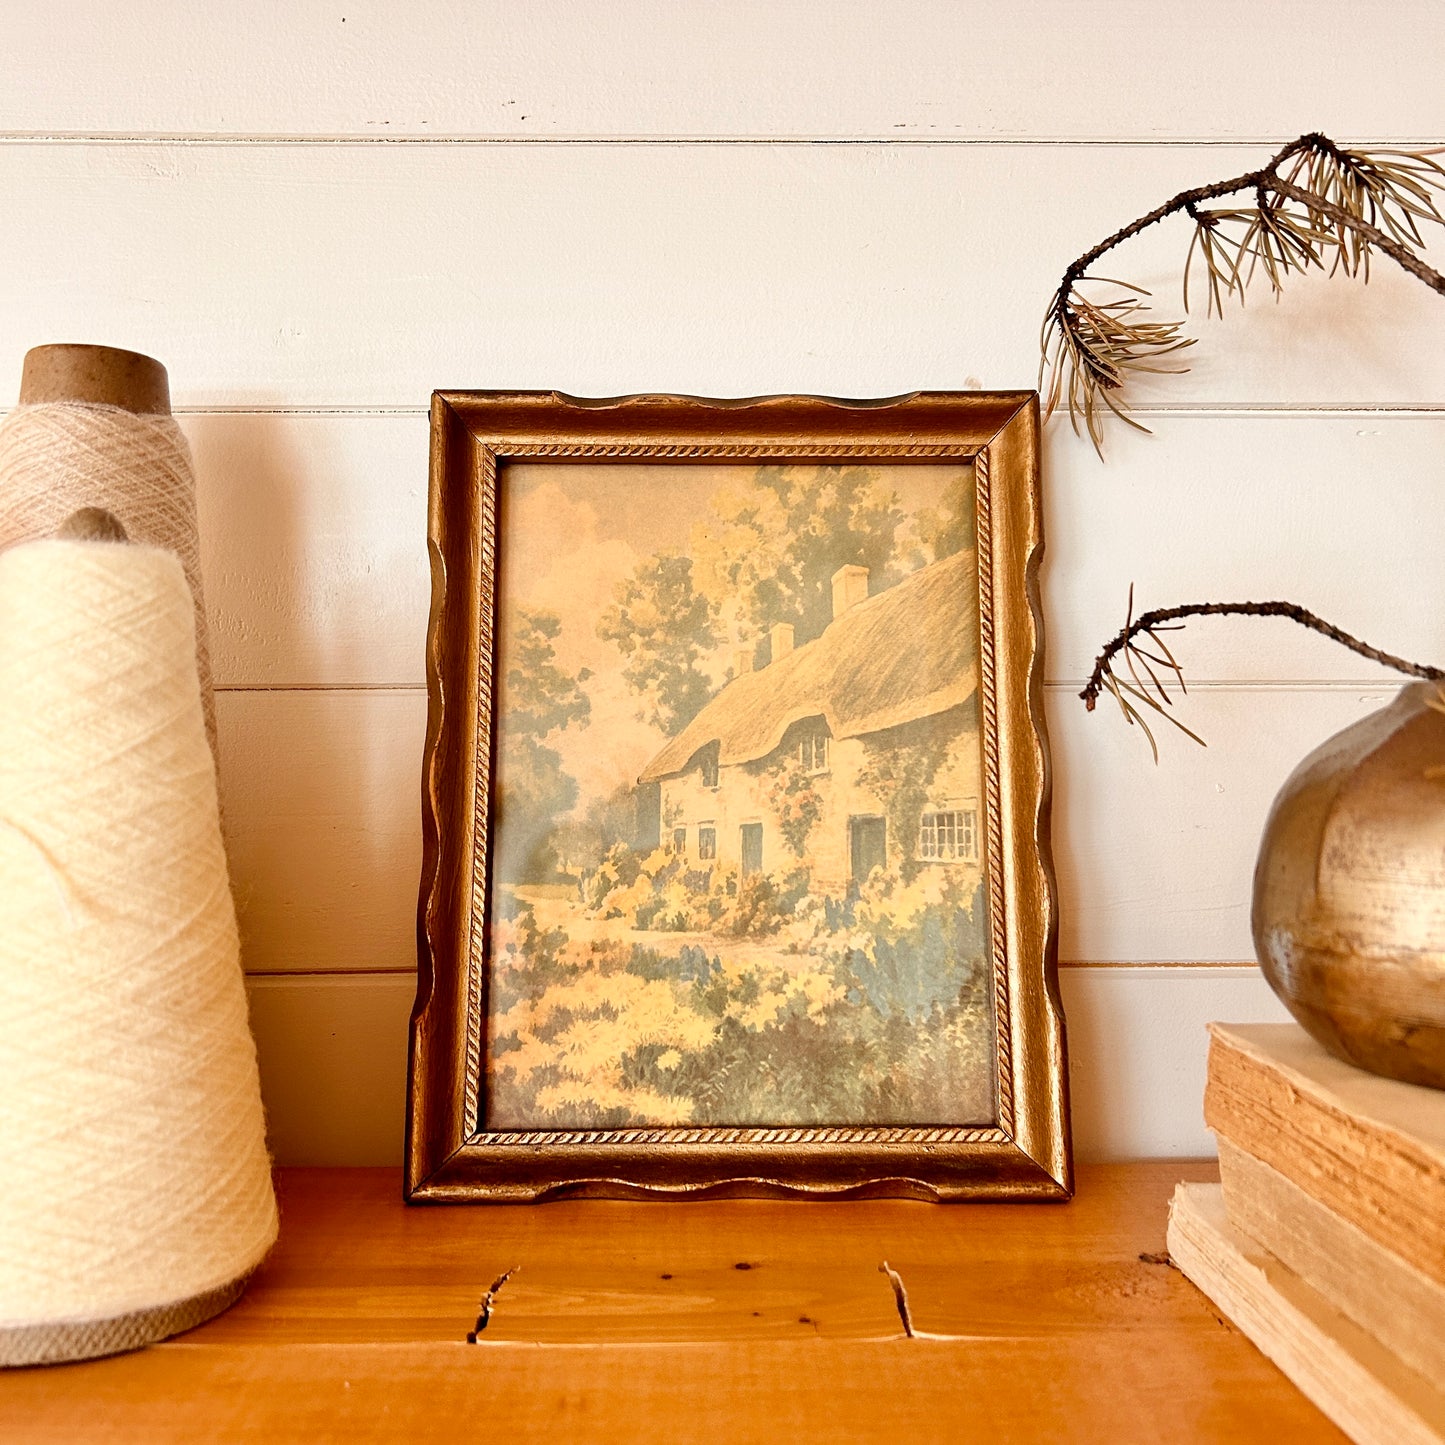 Vintage frame - Country house